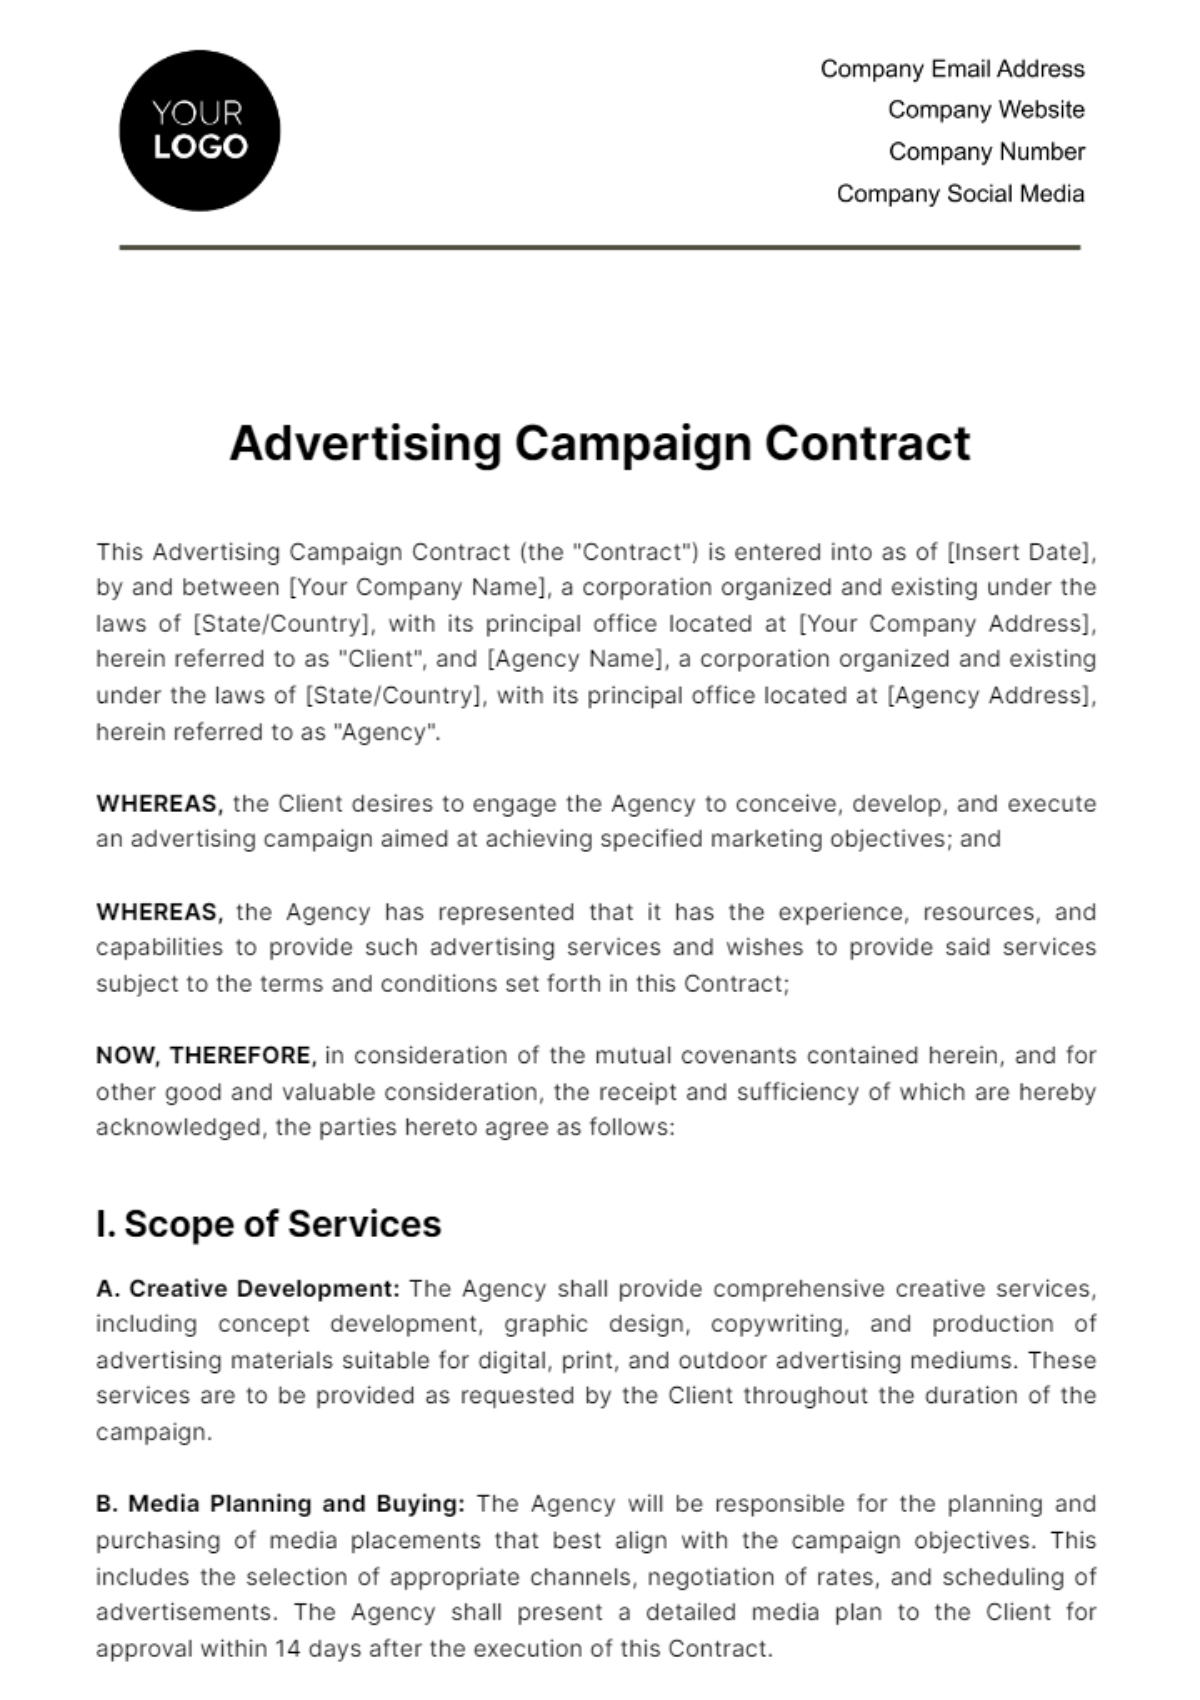 Free Advertising Campaign Contract Template